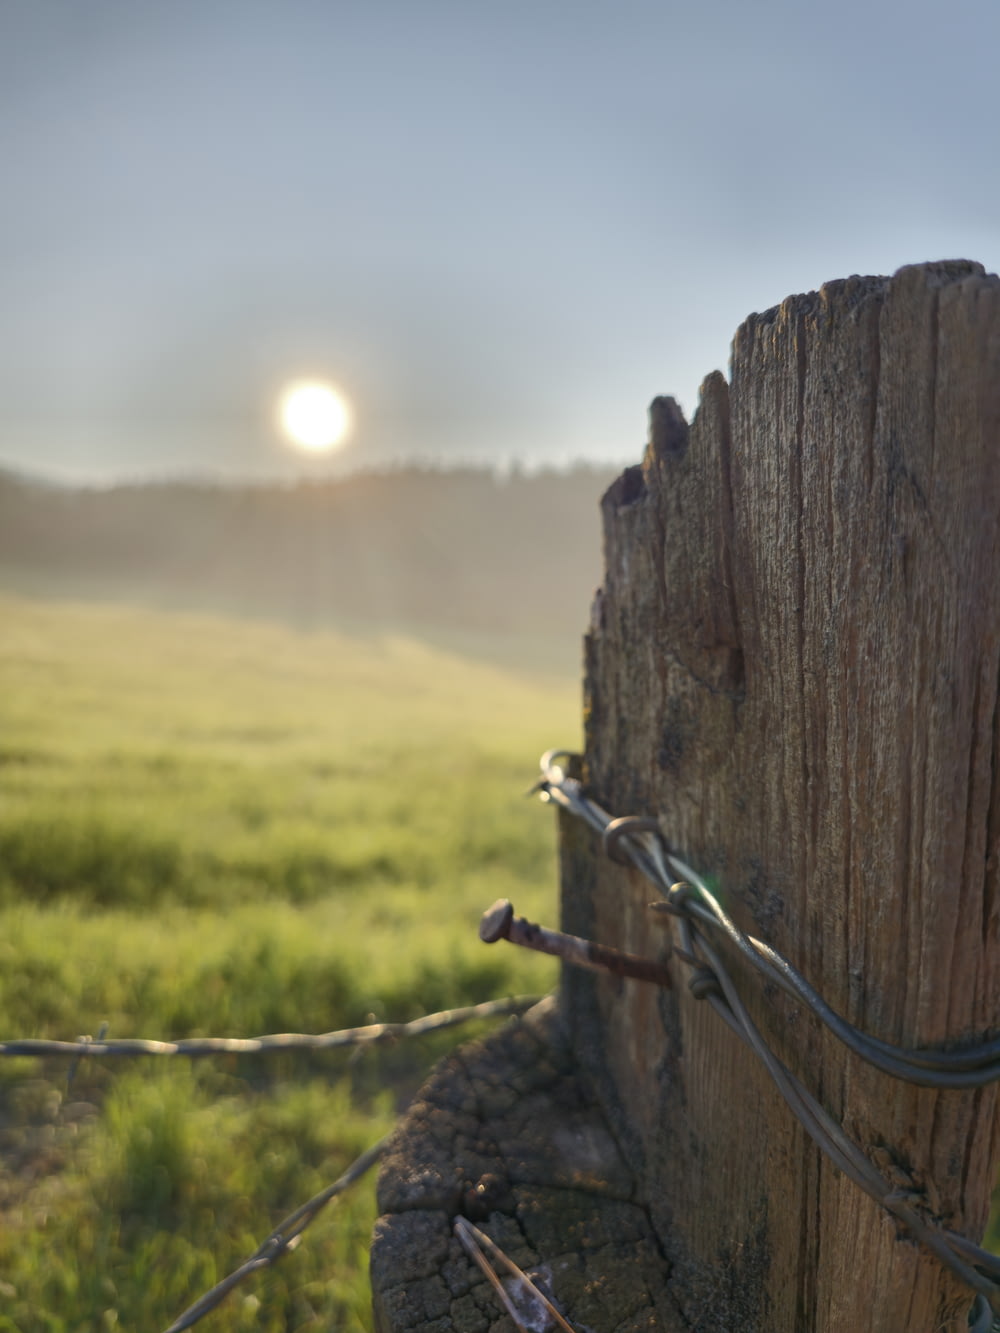 a fence post in a grassy field with the sun in the background